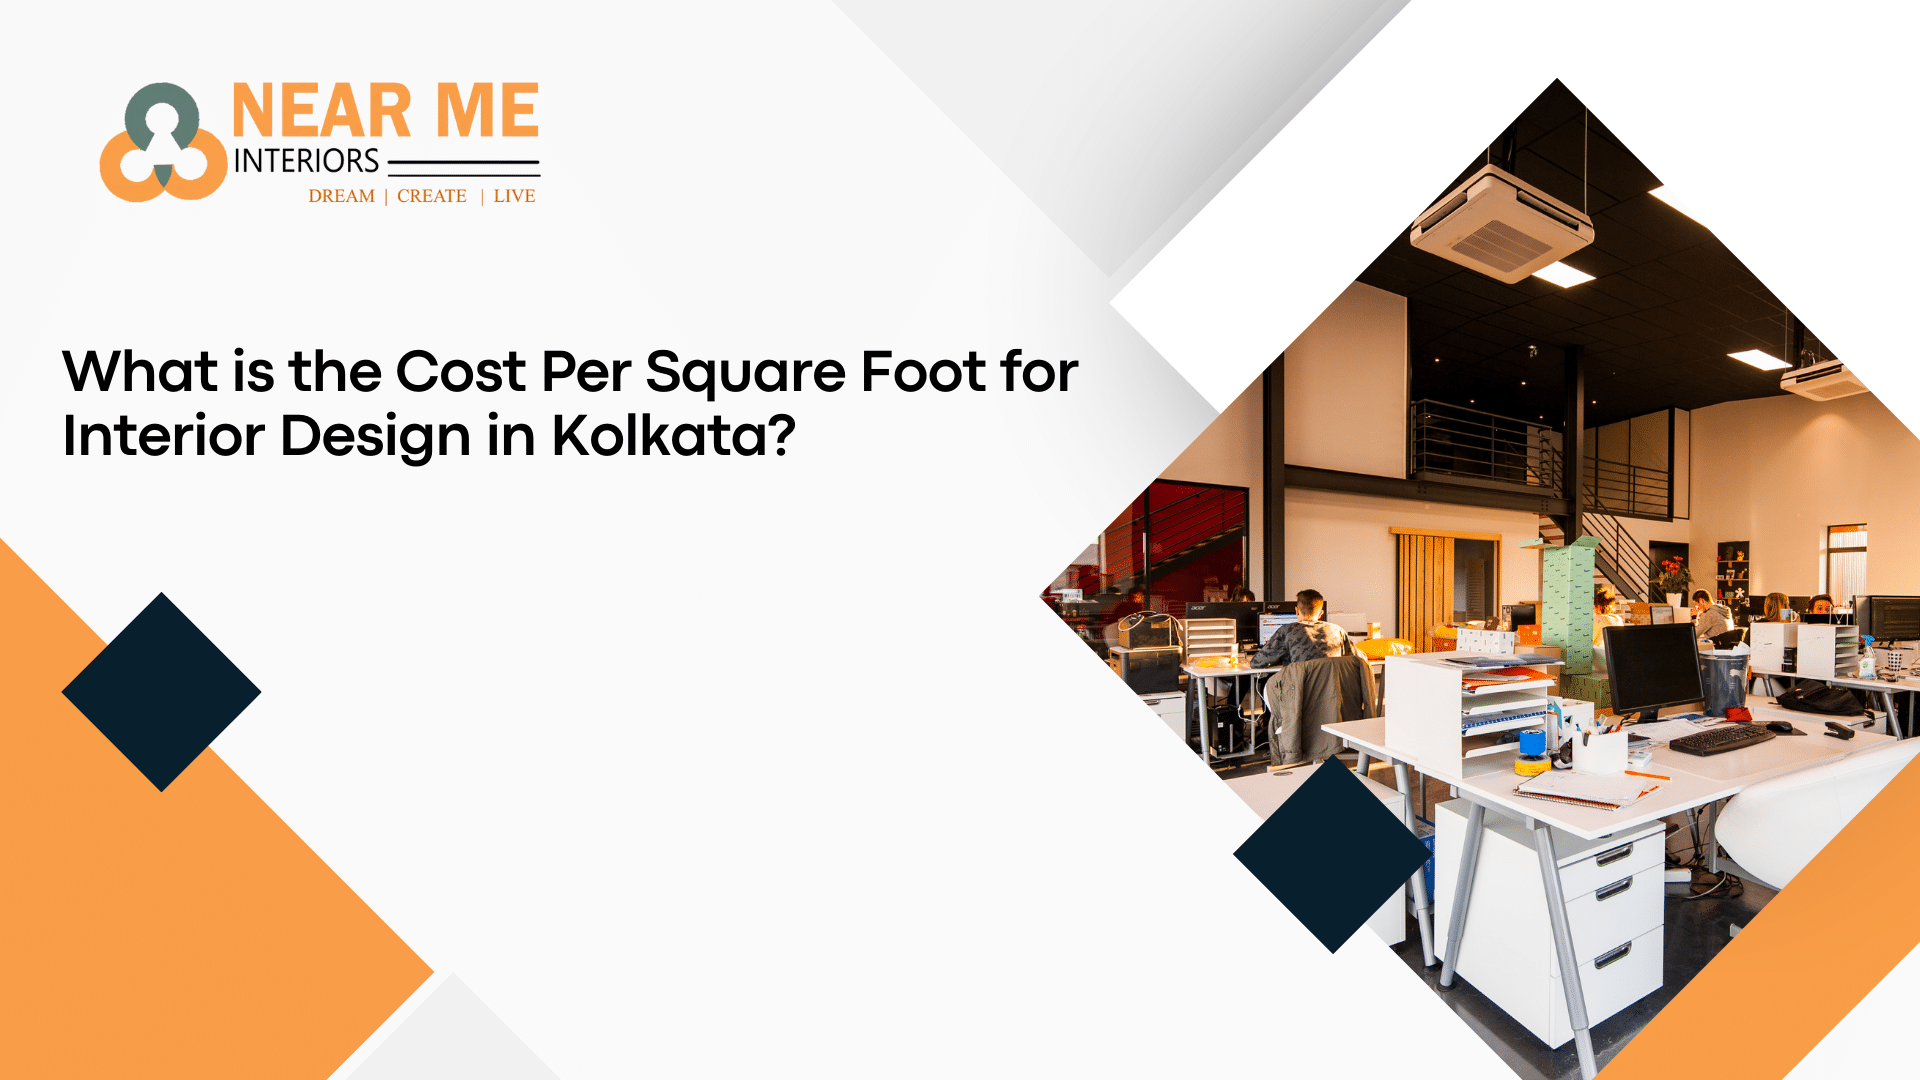 What is the Cost Per Square Foot for Interior Design in Kolkata?